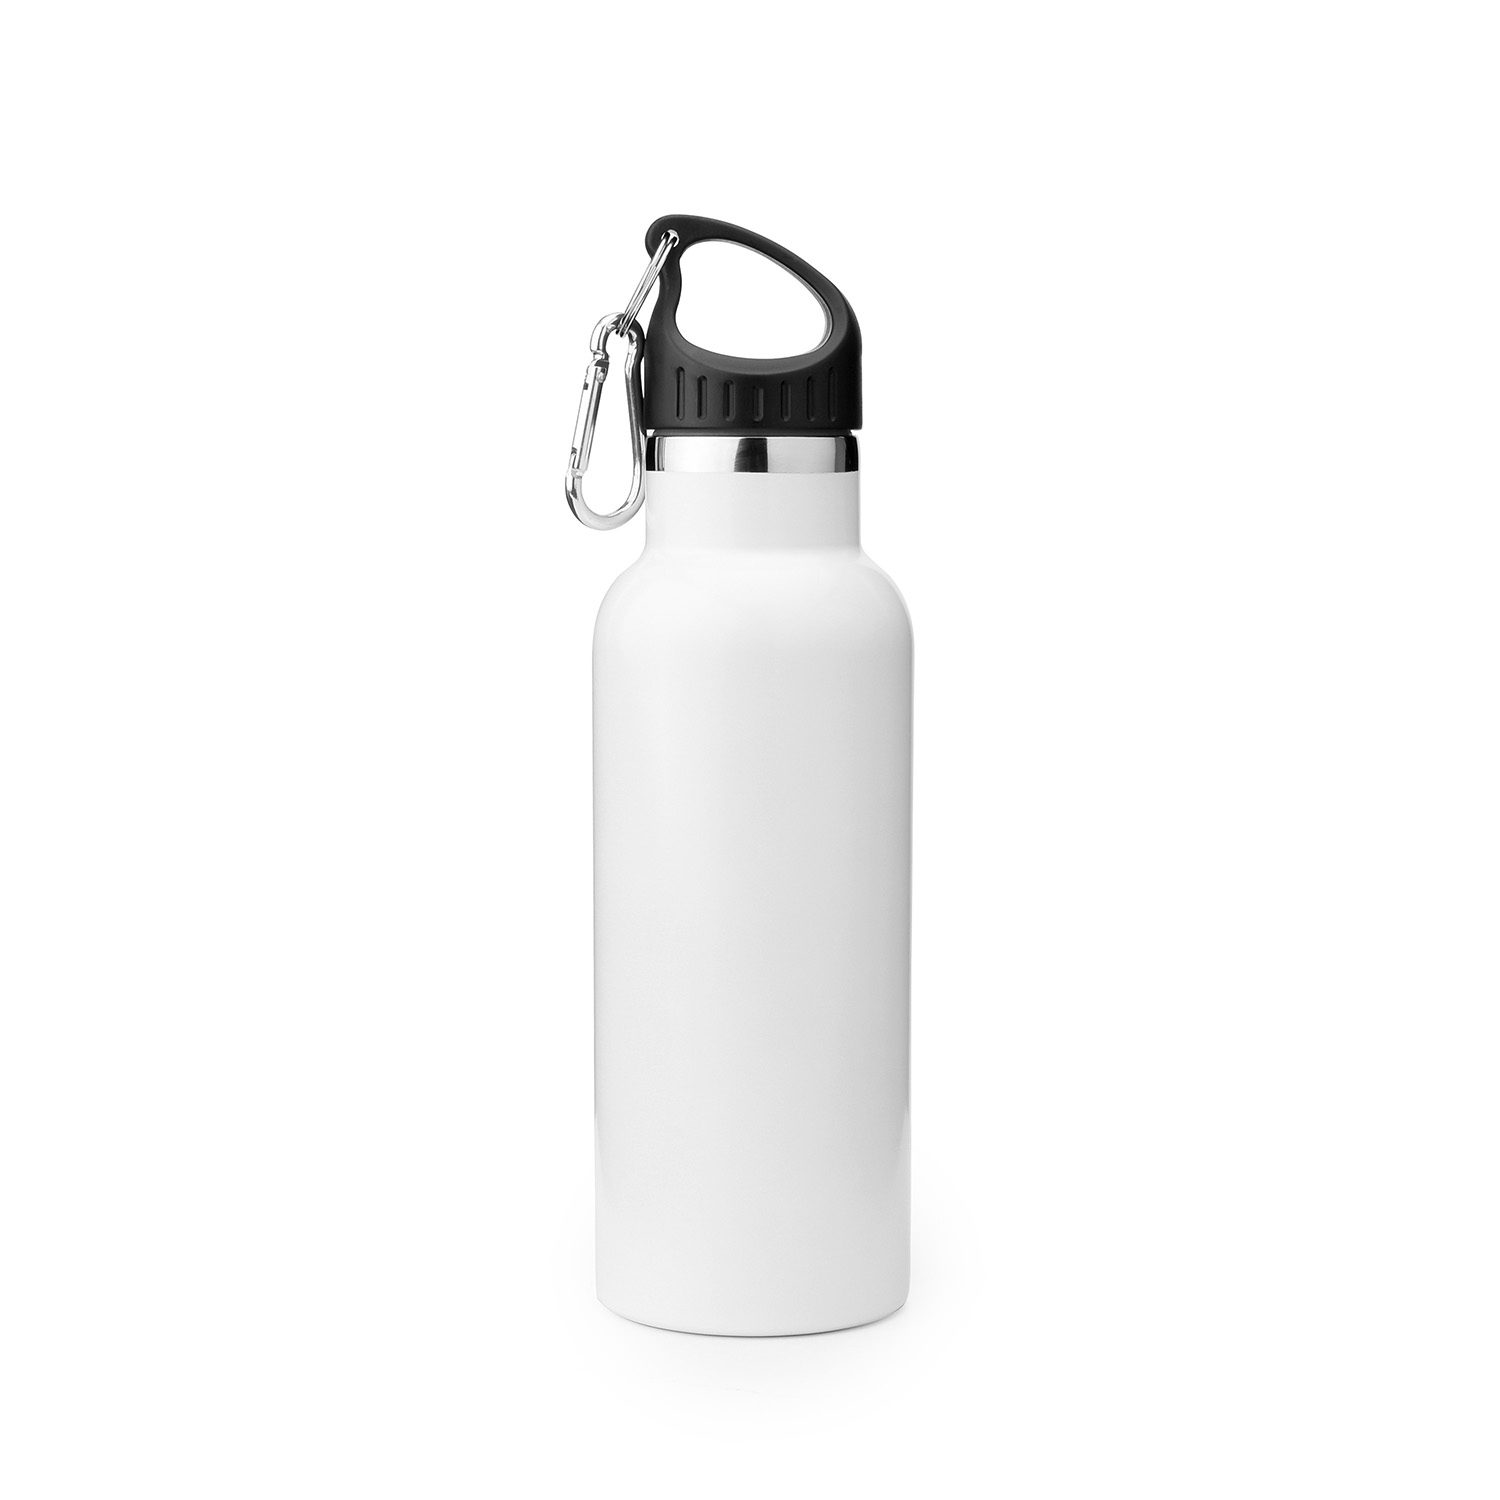 https://www.waterbottle.tech/wp-content/uploads/2019/08/double-wall-vacuum-insulated-stainless-steel-water-bottle-with-carabiner-s1217a5-1.jpg